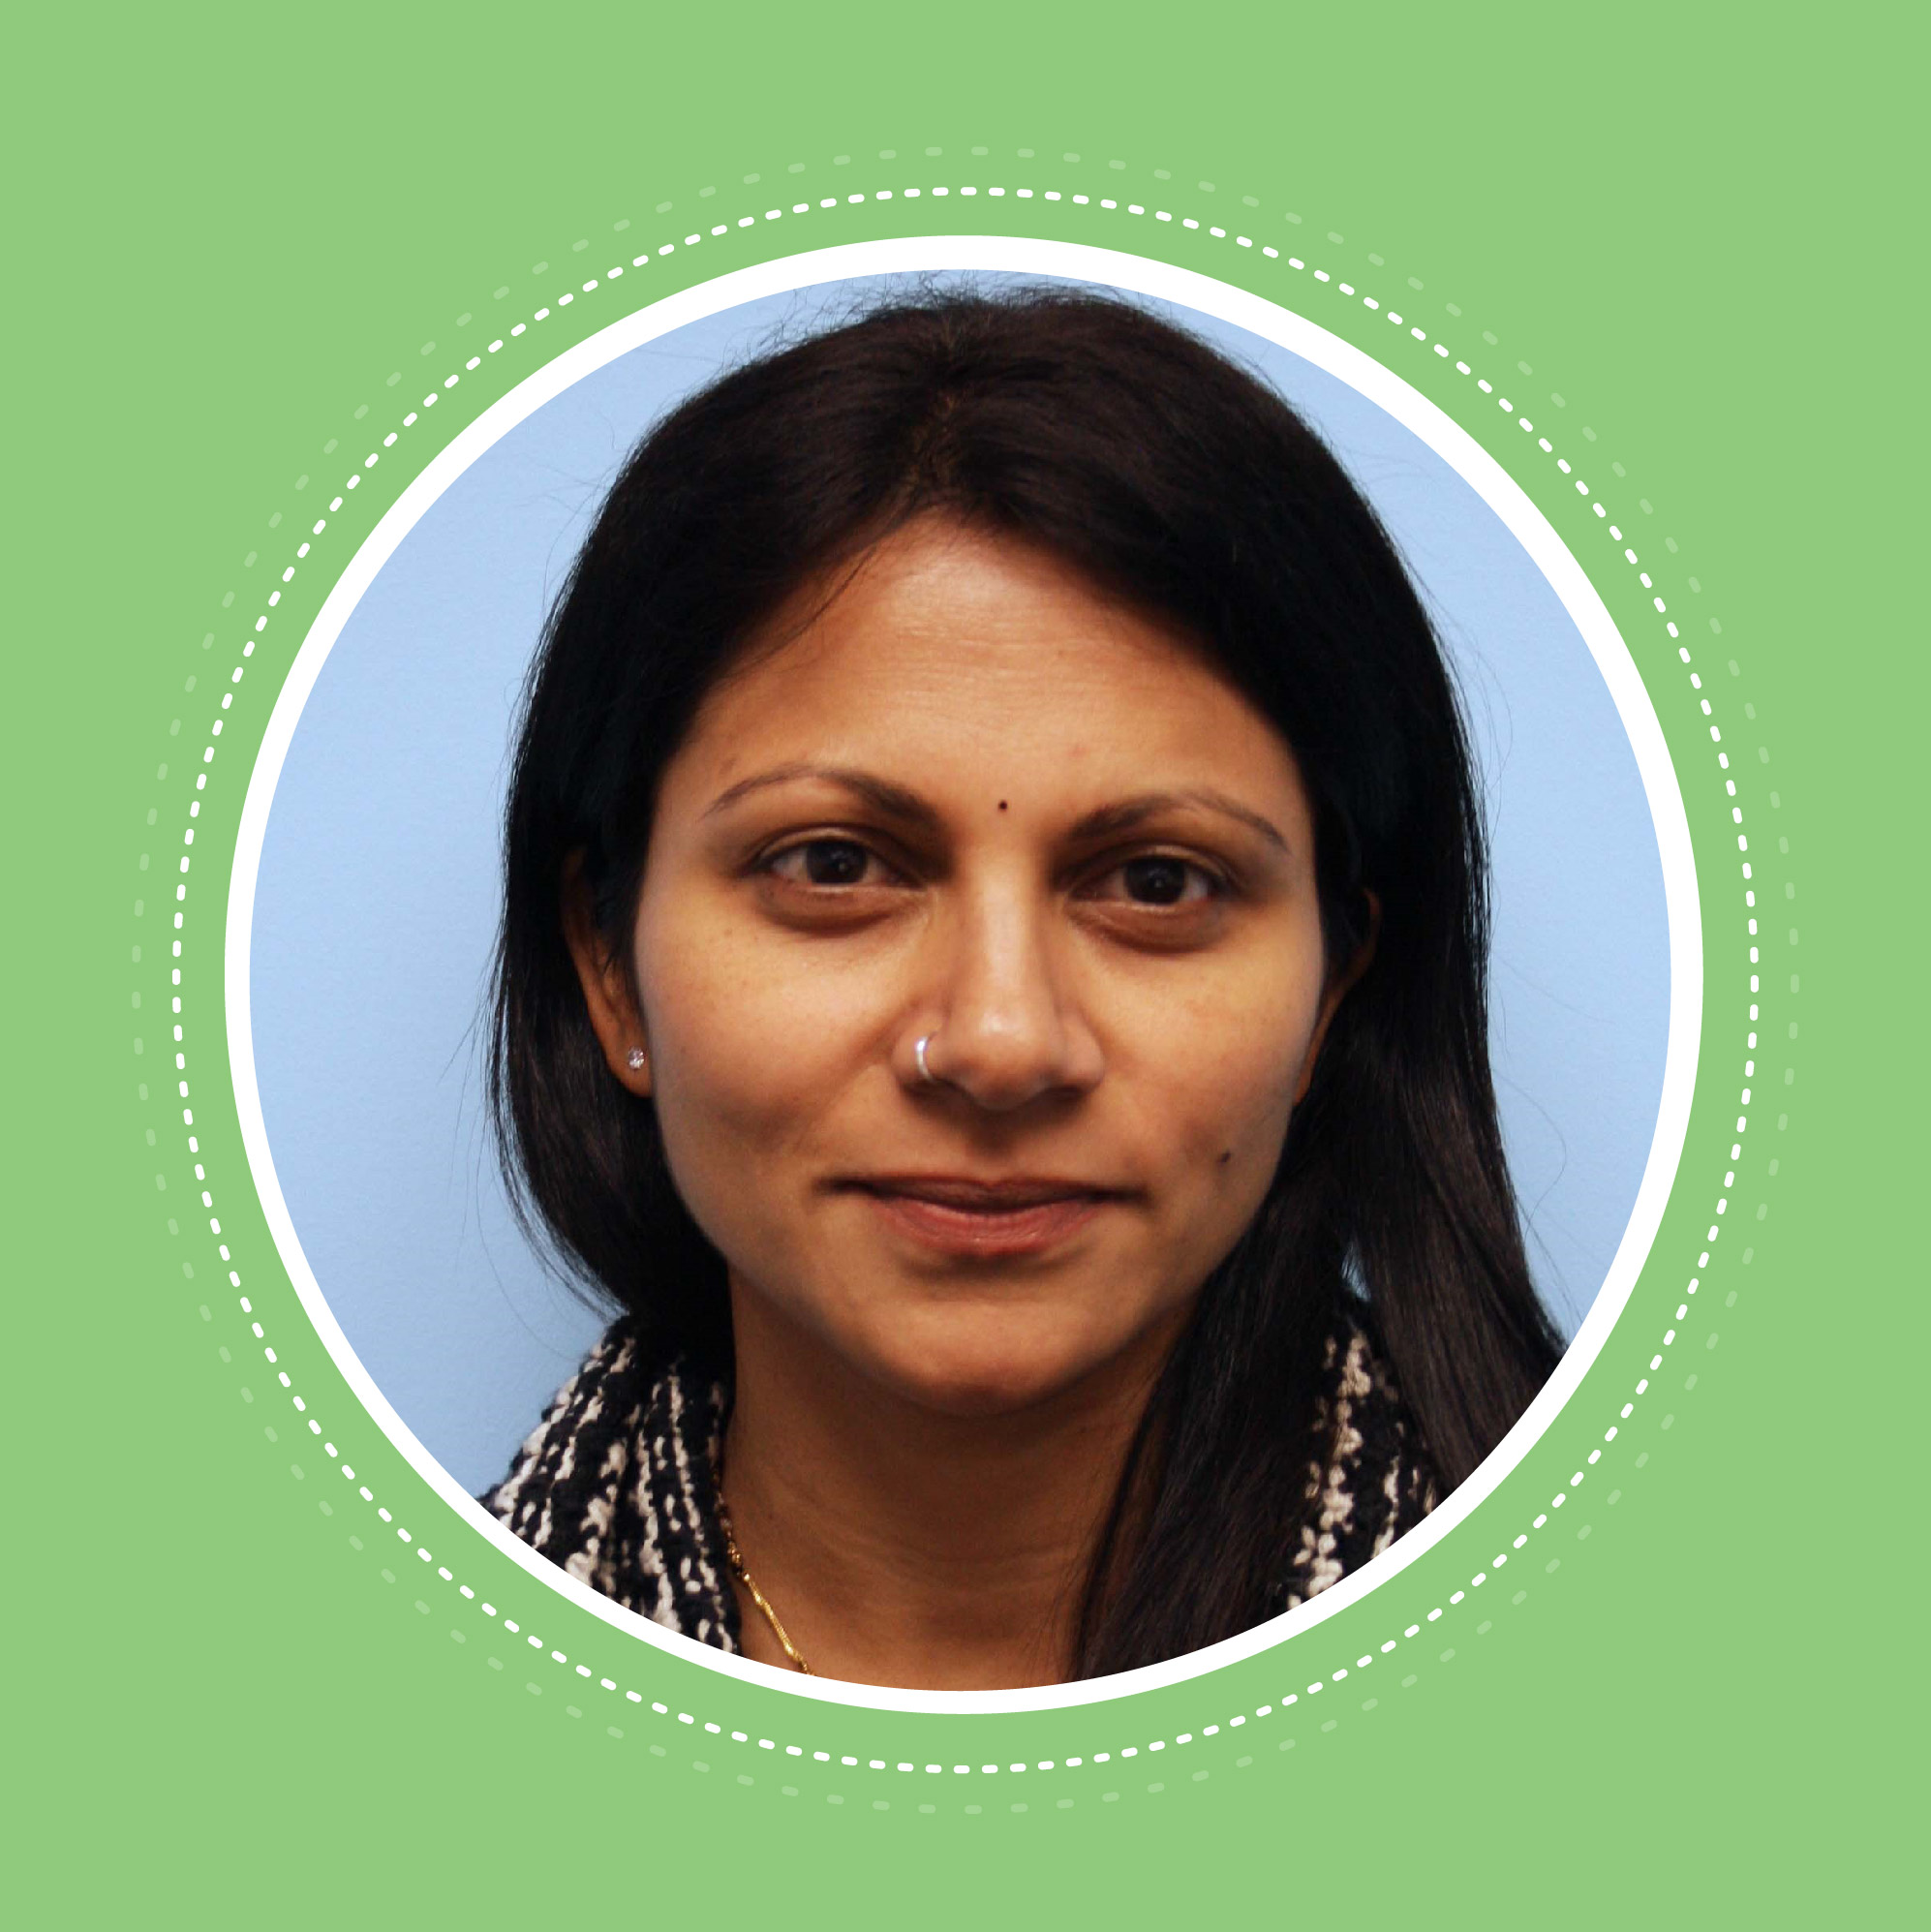 A love of working with children led Shilpa to become a Kumon franchisee